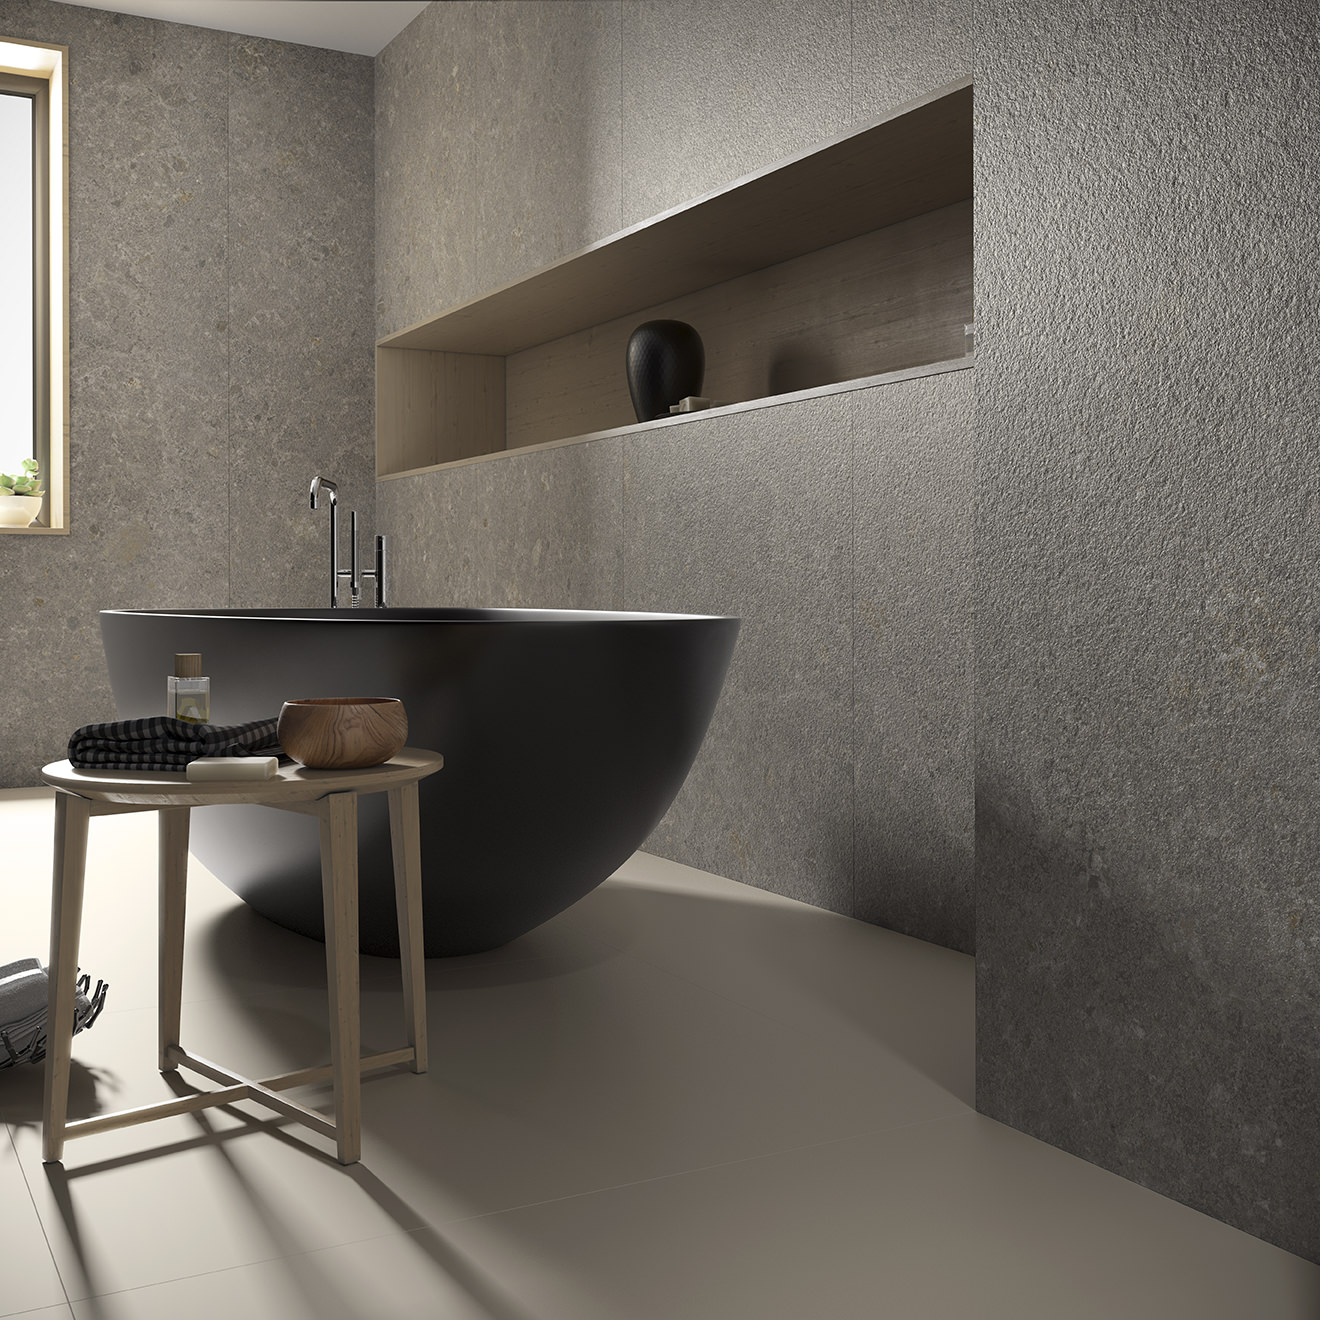 Large format surfaces, tailor-made to fit the bathroom